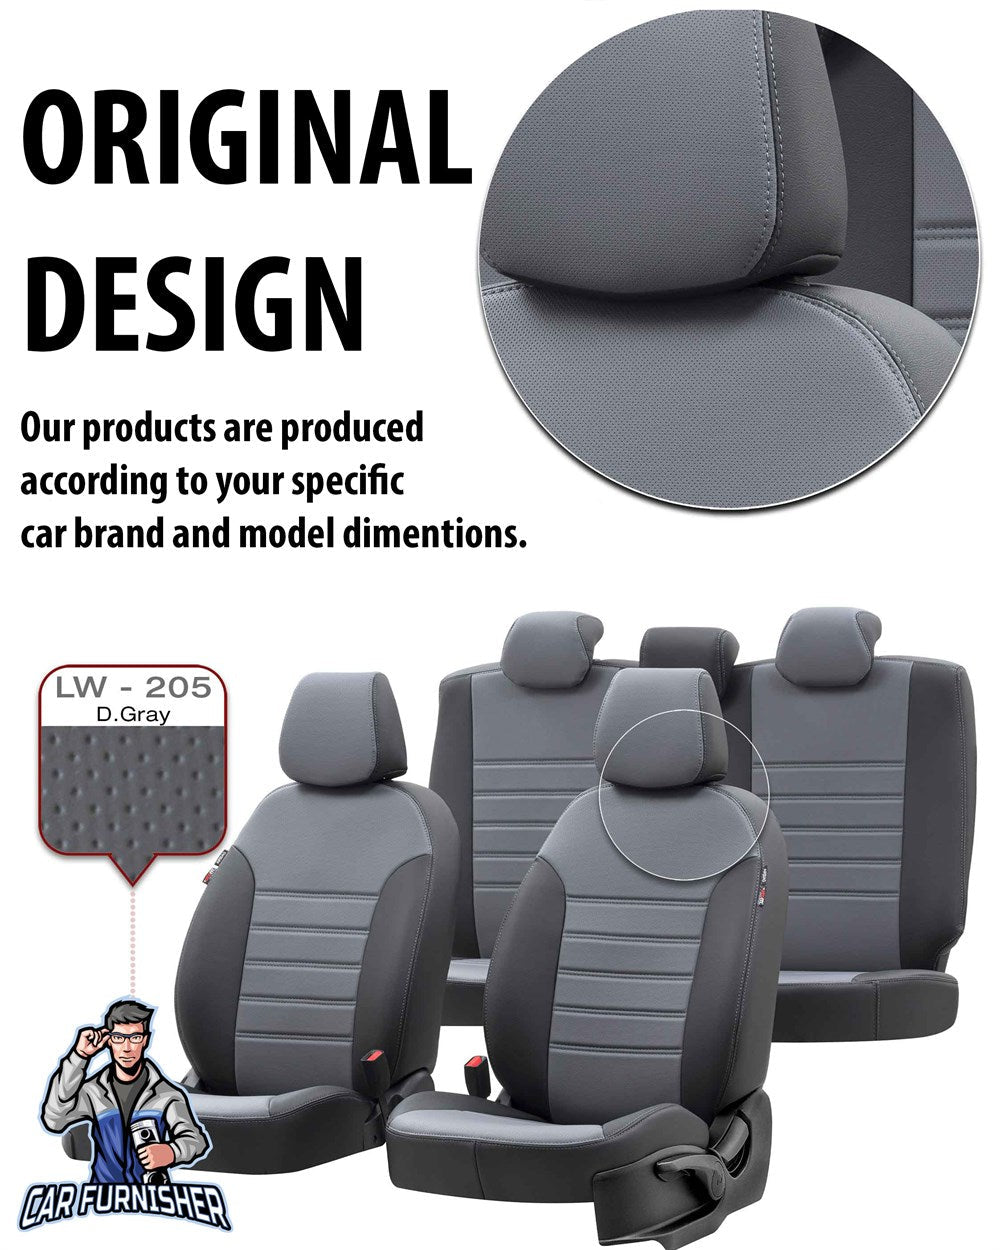 Kia Carens Seat Cover Istanbul Leather Design Smoked Leather